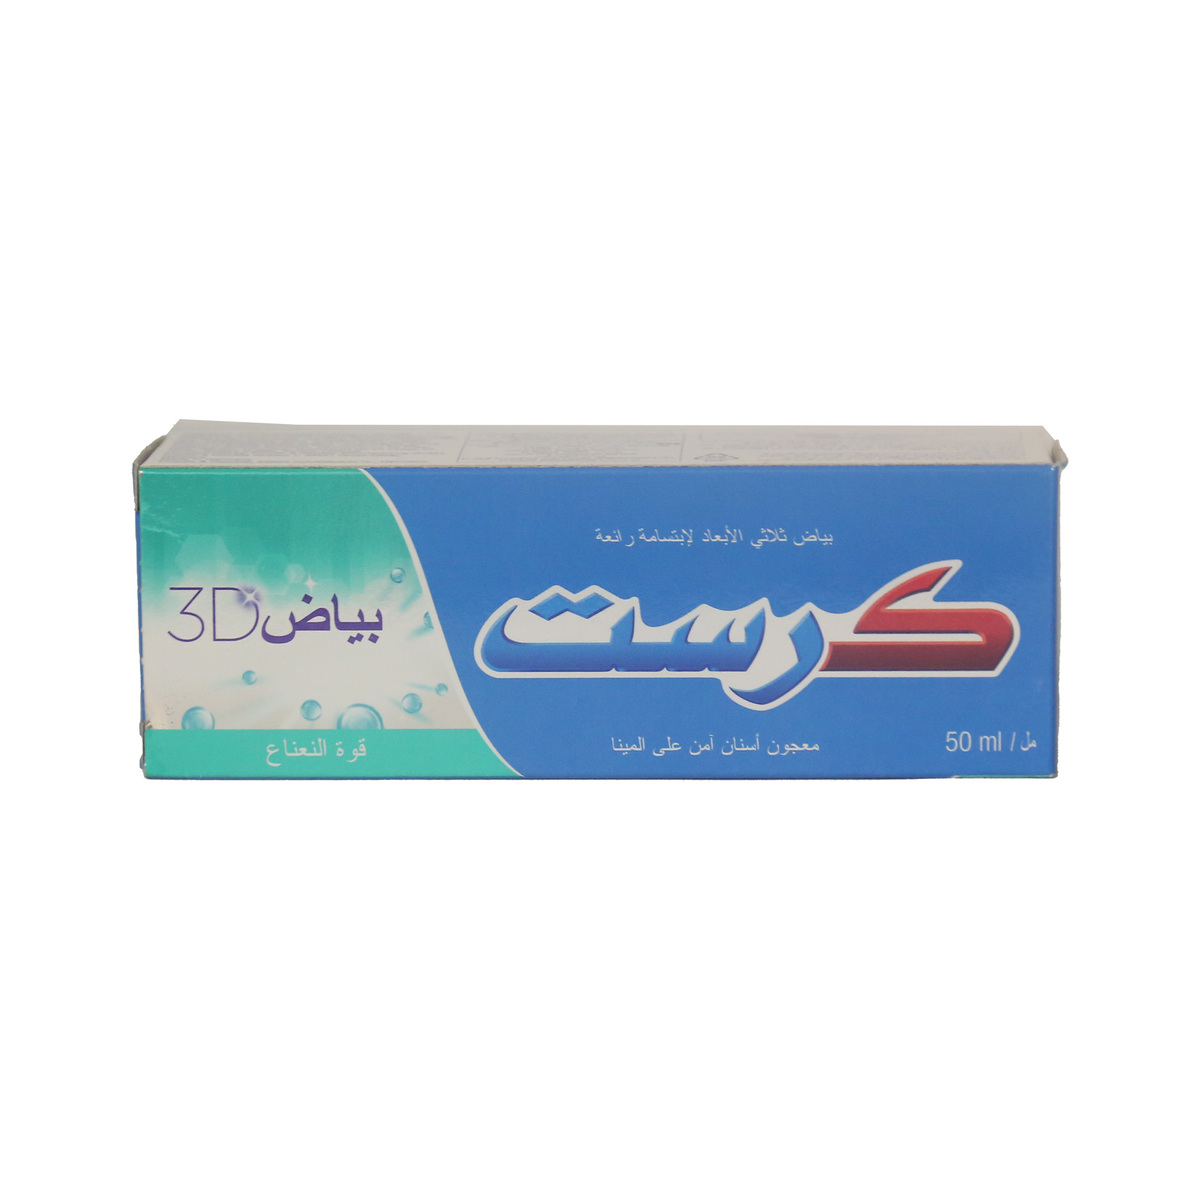 Crest Toothpaste 3D White Extreme Mint 50 ml